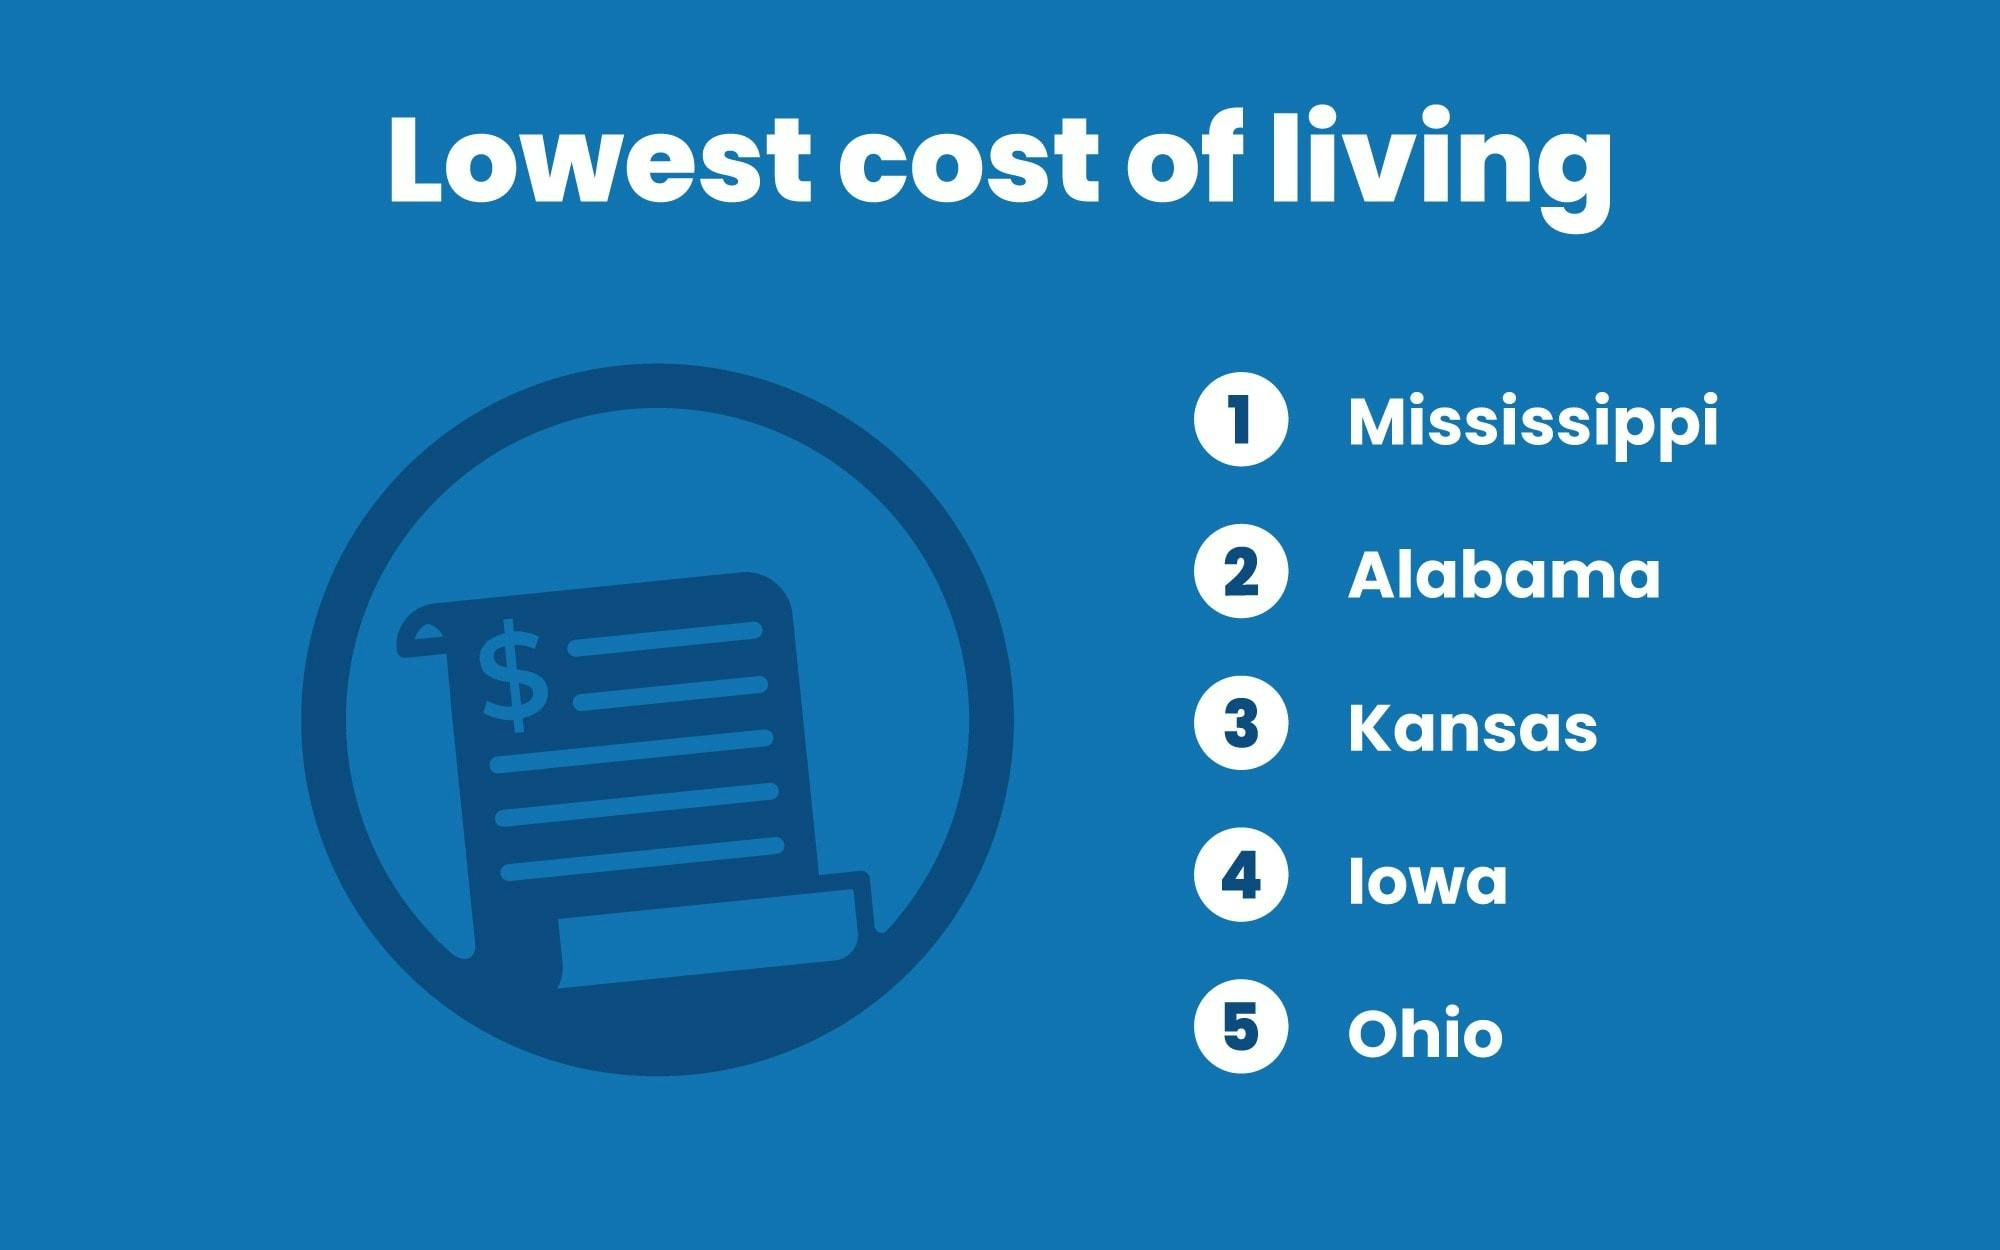 Lowest cost of living states